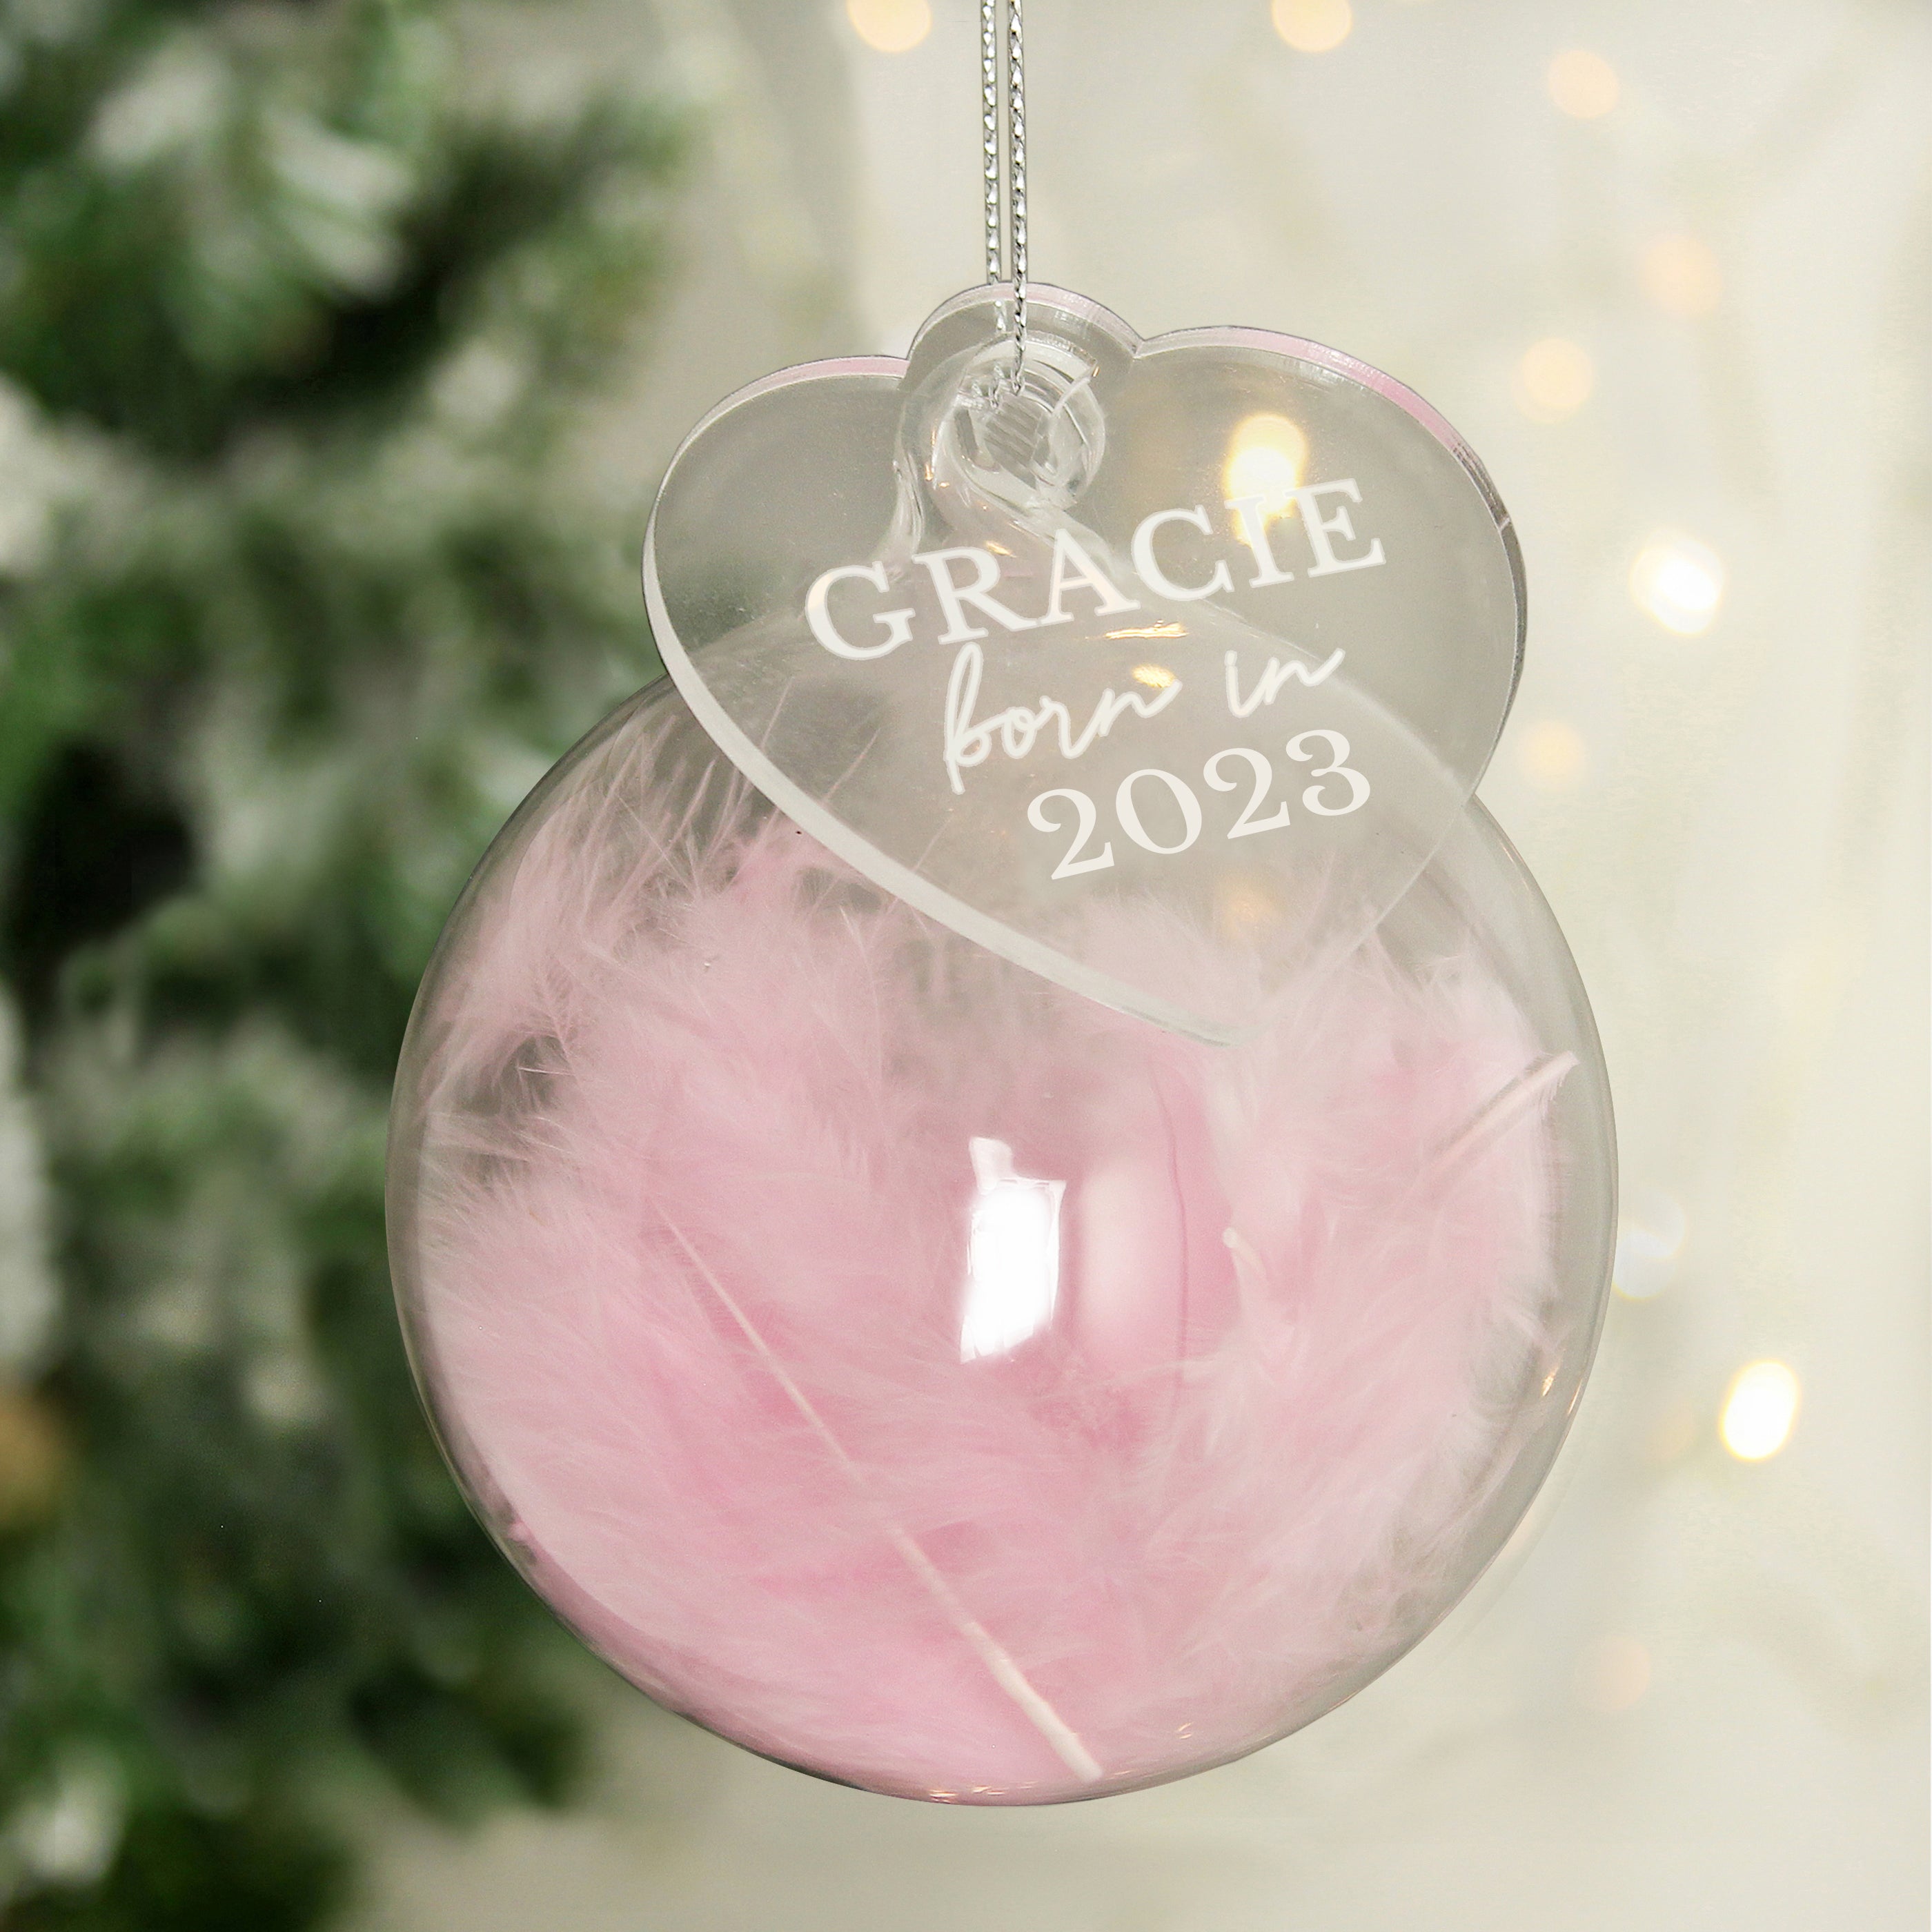 Personalised Born In Pink Feather Glass Bauble With Heart Tag Hanging From A Christmas Tree In Background